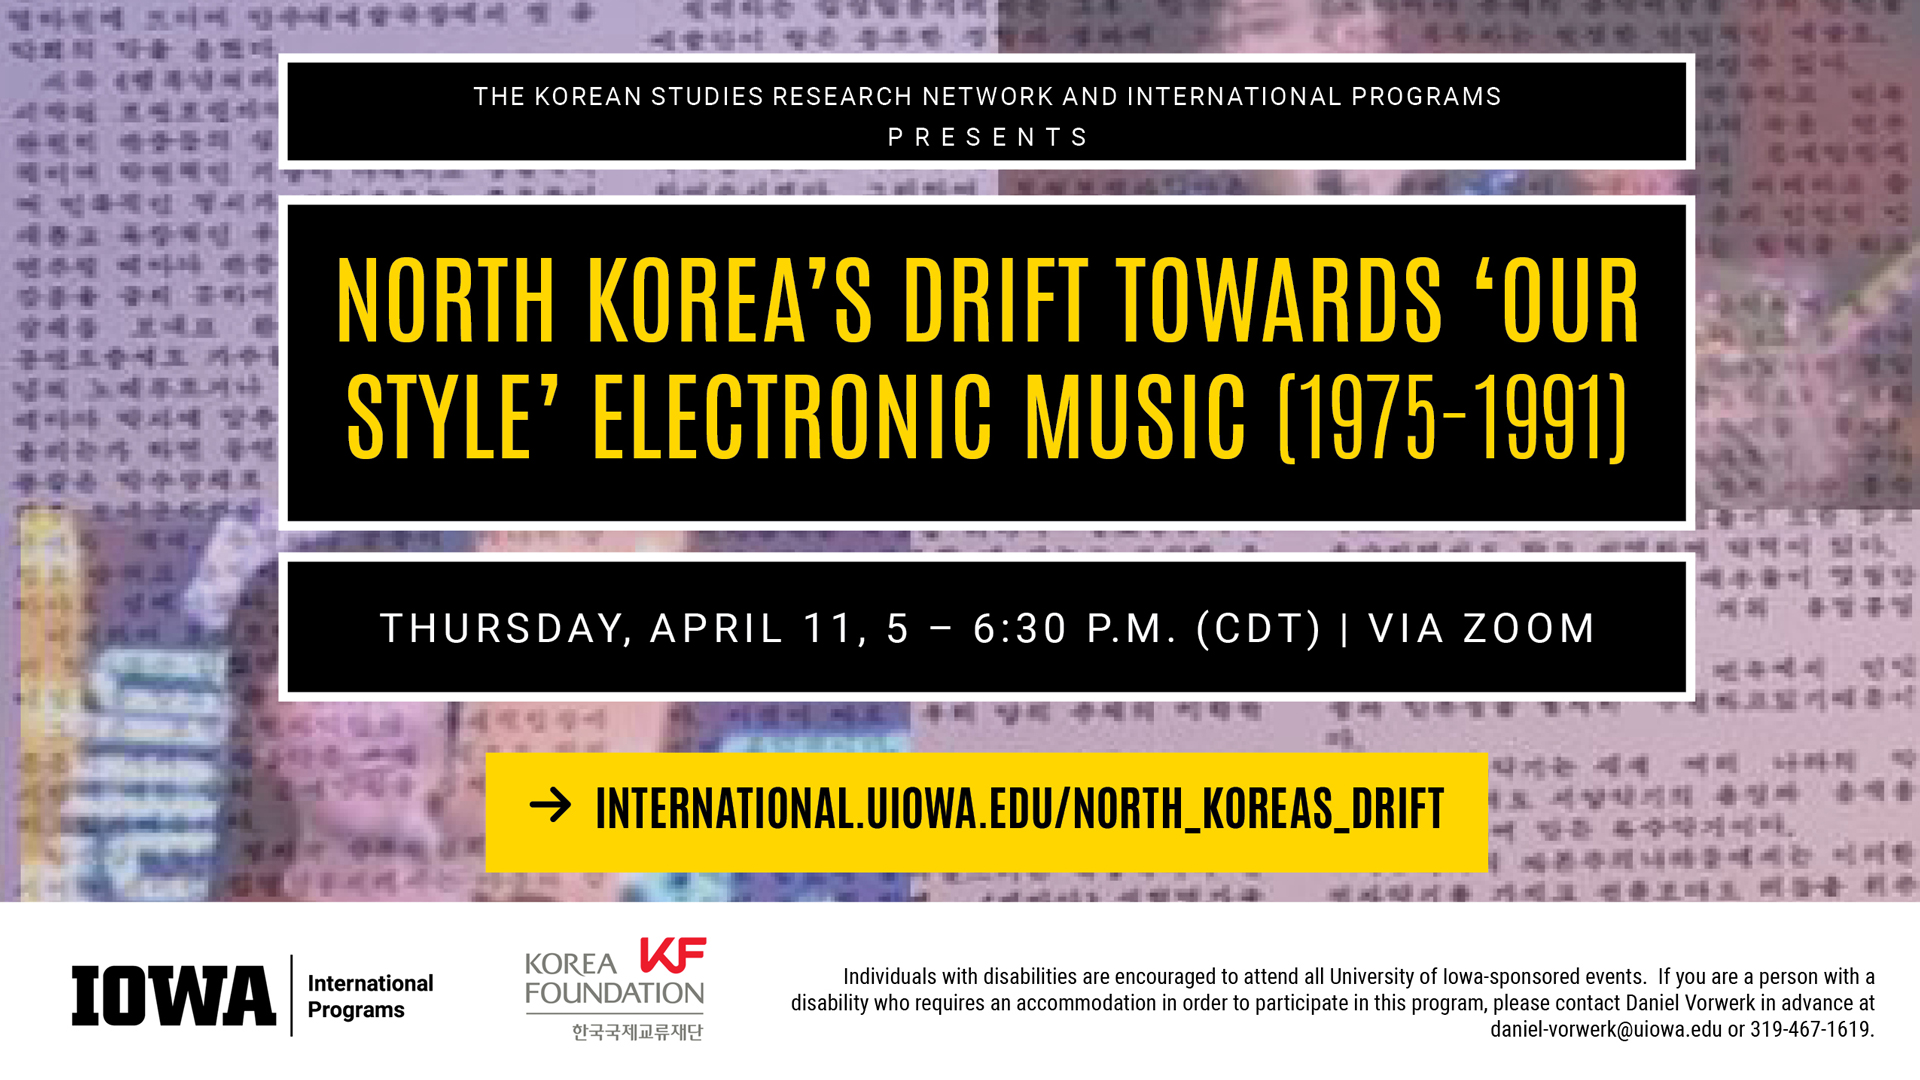 North Korea’s Drift Towards “Our Style” Electronic Music (1975-1991)